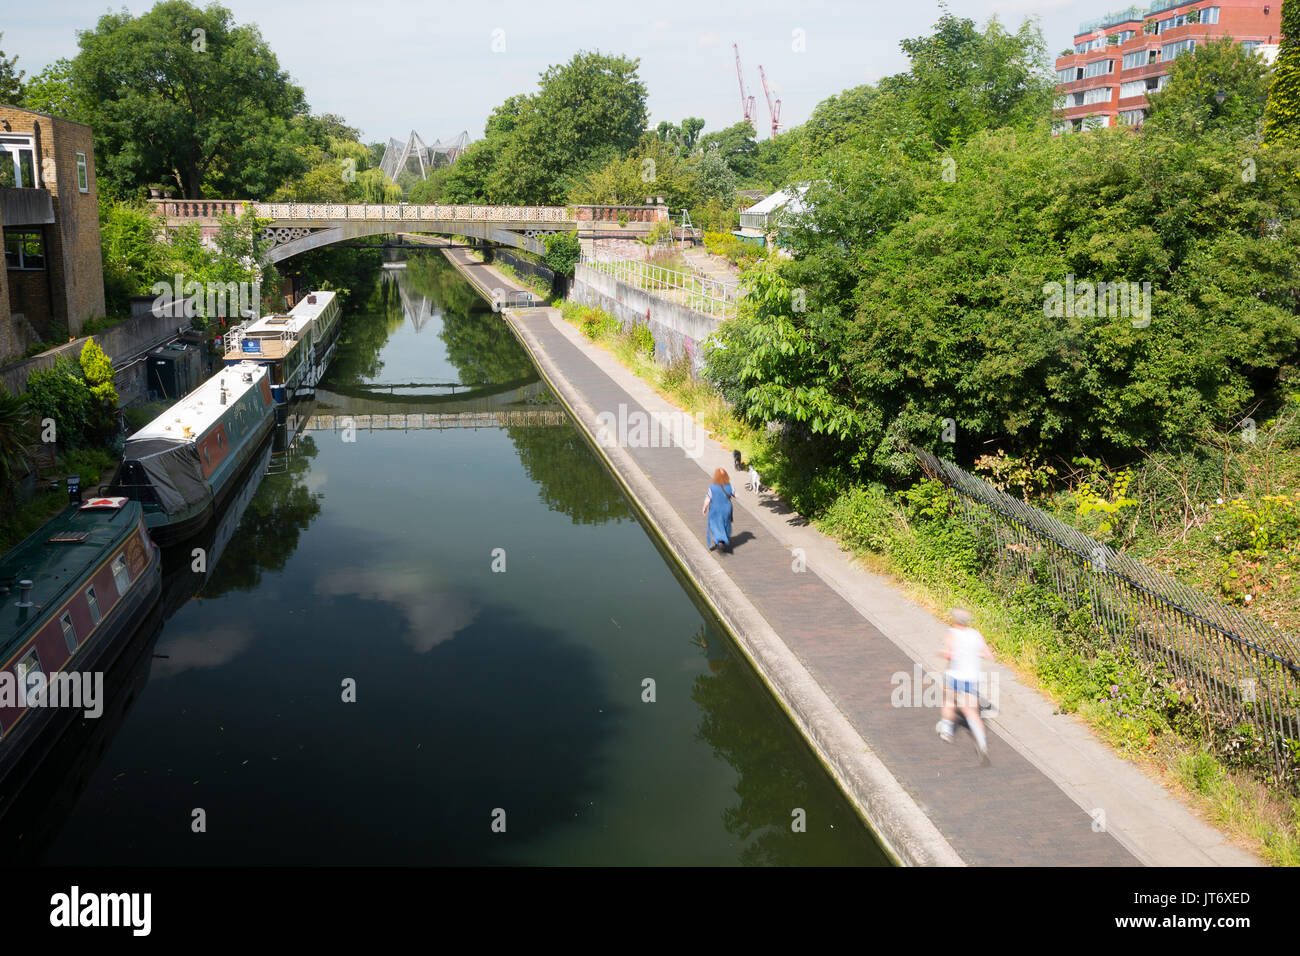 Camden Town, London, UK. Joggers and walkers on the towpath along Camden Canal near London Zoo. Stock Photo